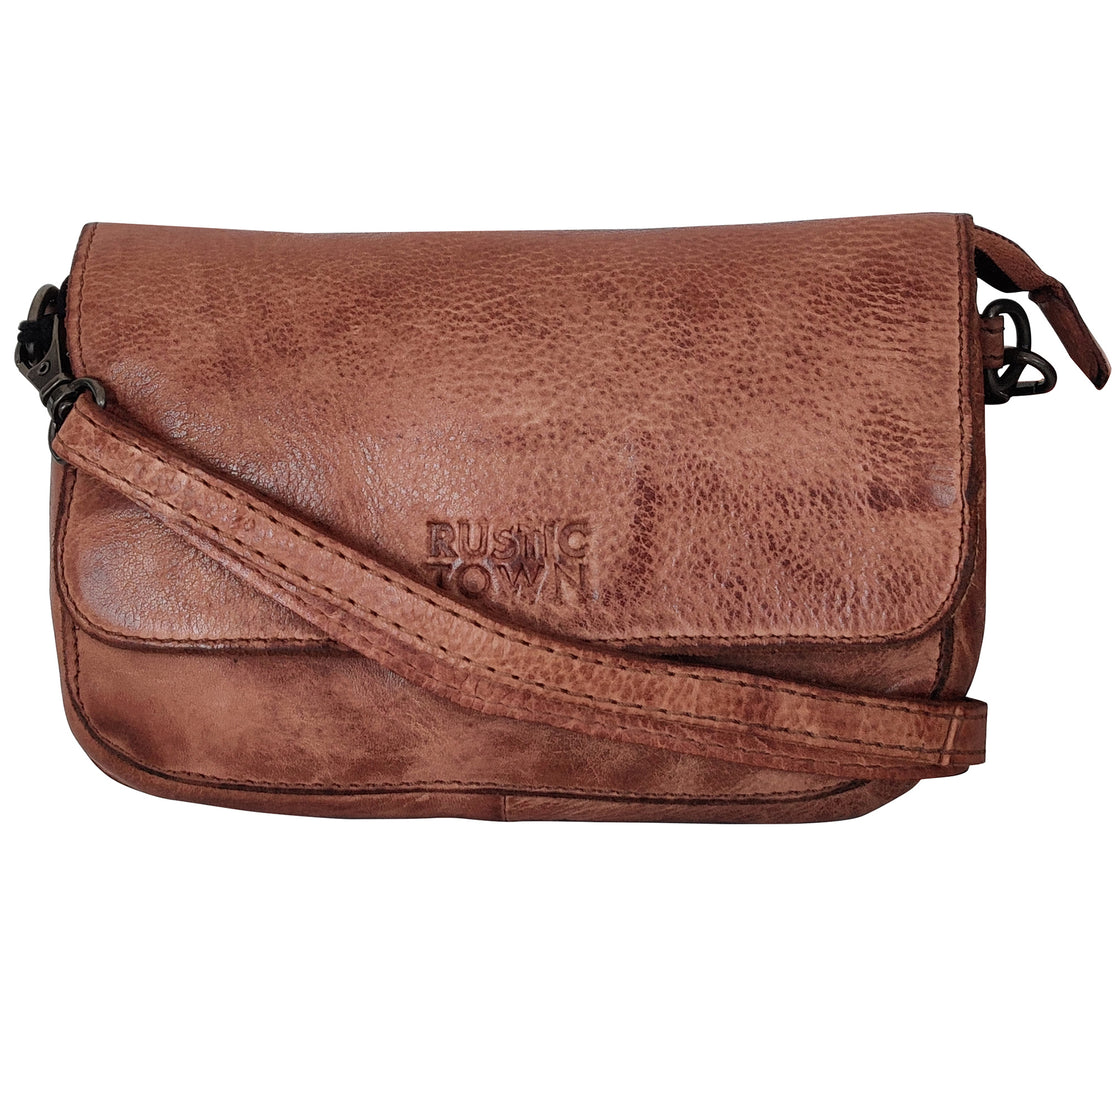 Movsou Womens Leather Purses and Handbags Top Handle India | Ubuy